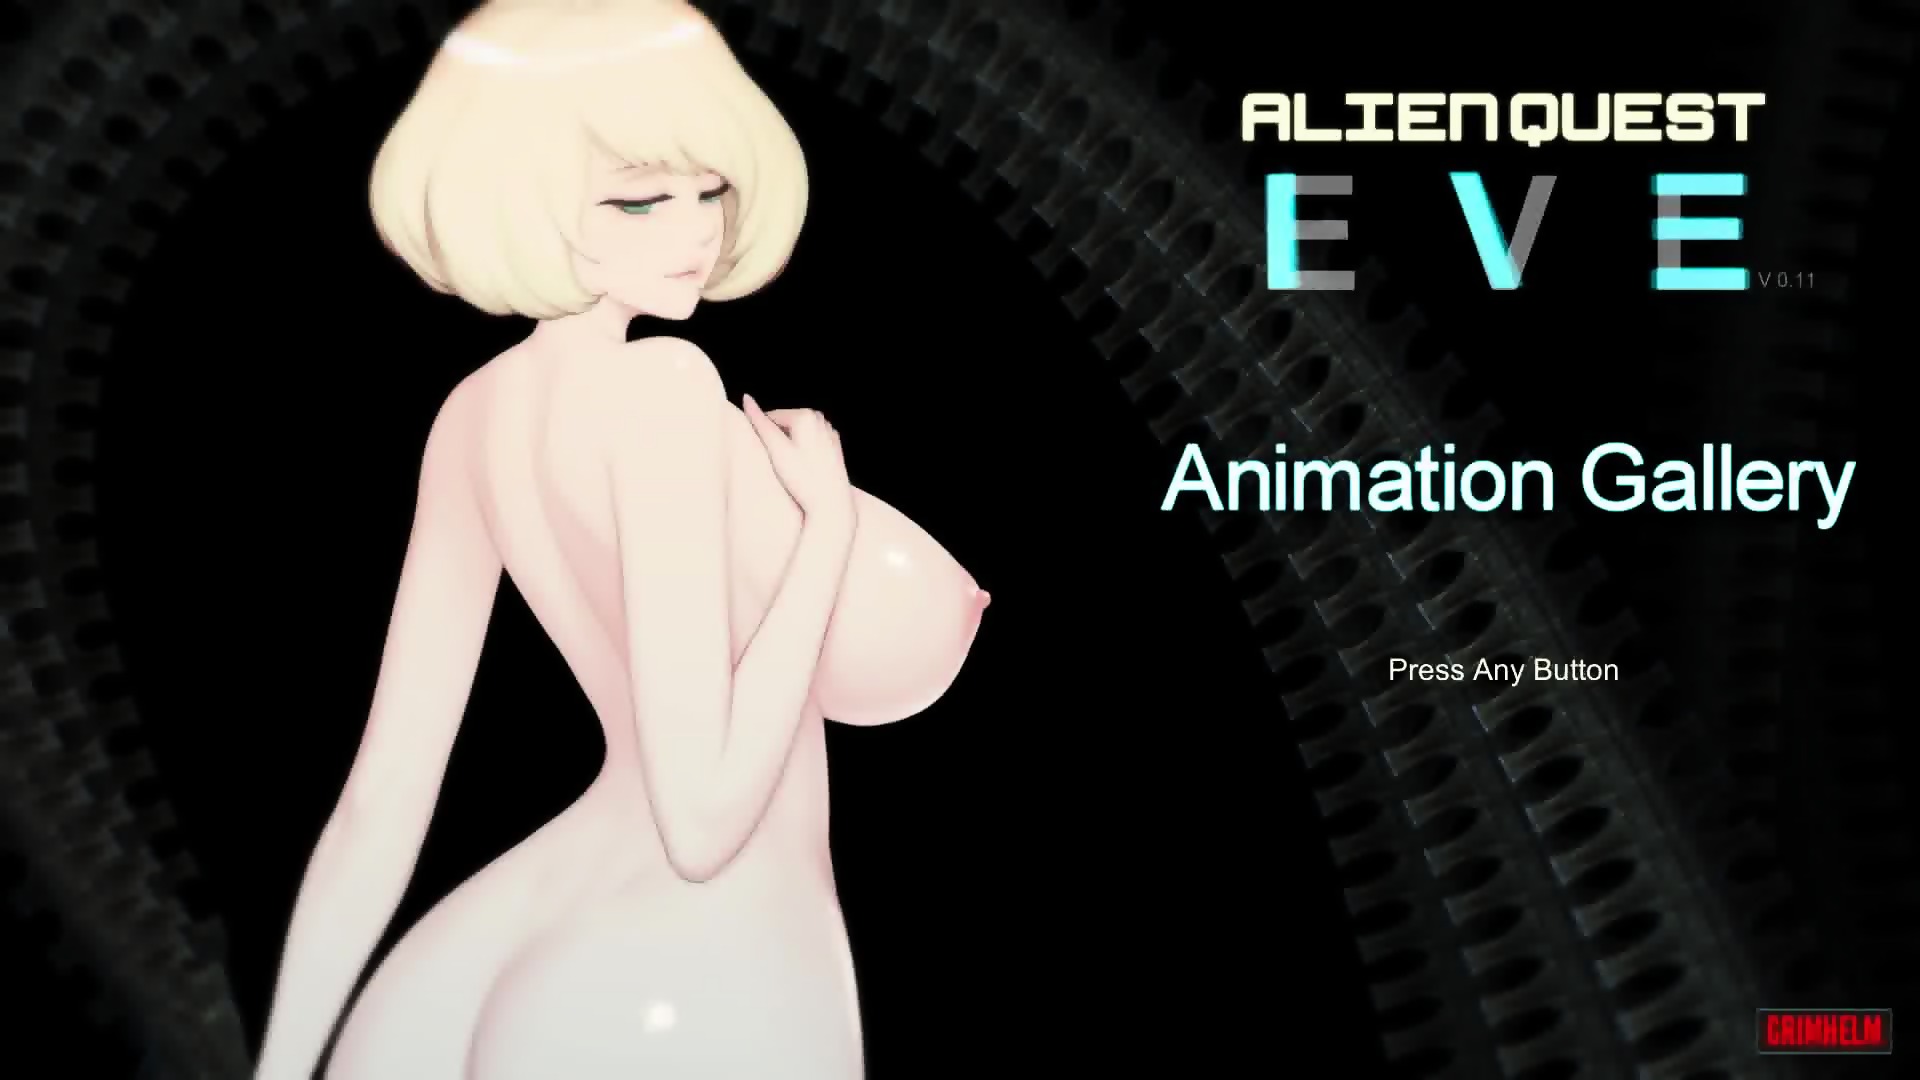 Alien Quest Eve Version 0 11 Animation Gallery Hd